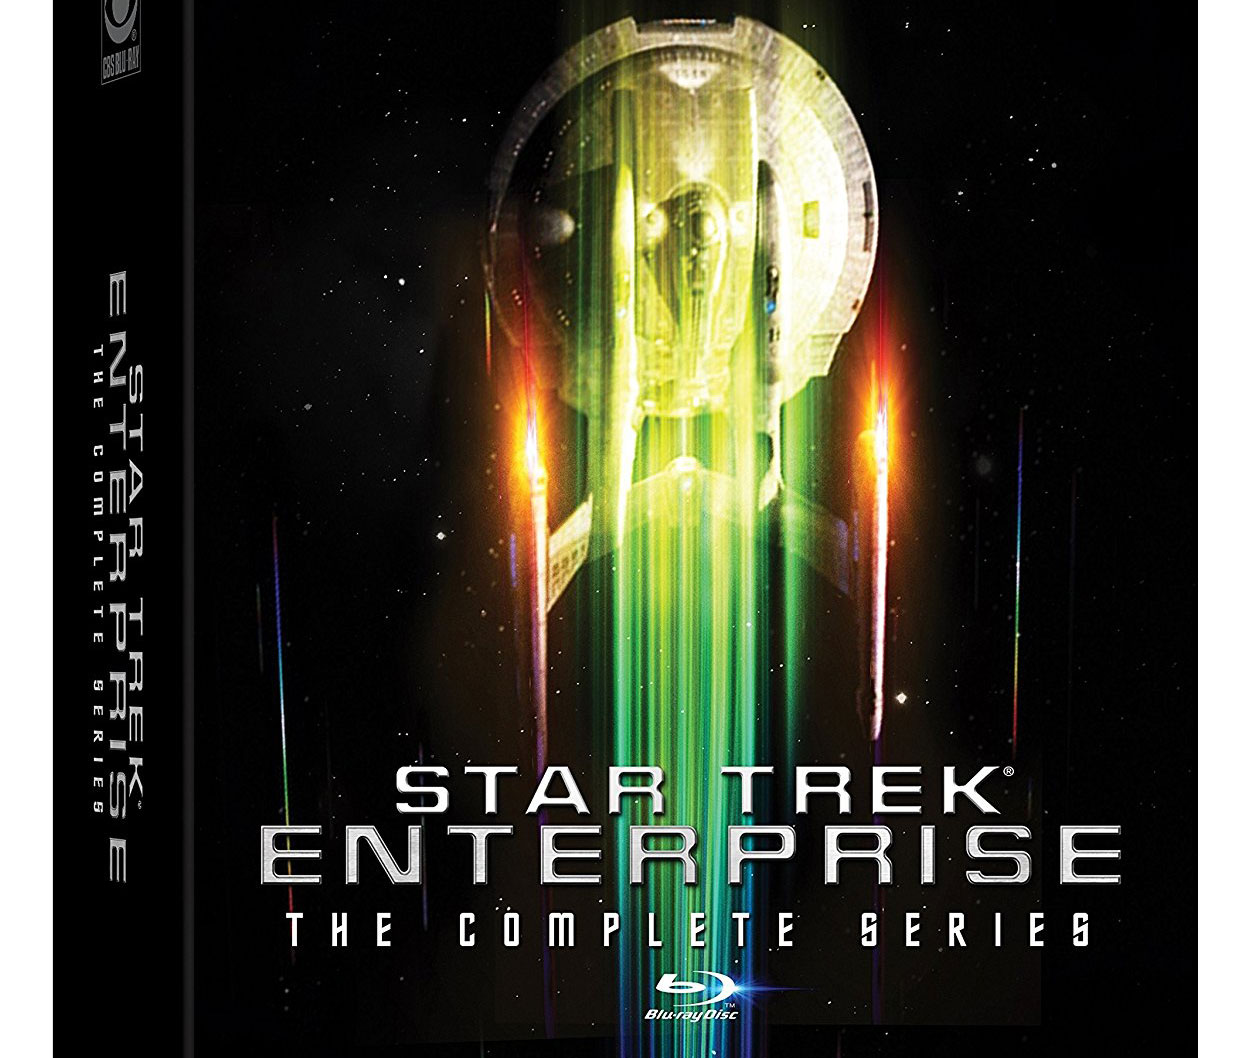 ‘Star Trek: Enterprise: The Complete Series’ Blu-ray Available For Pre